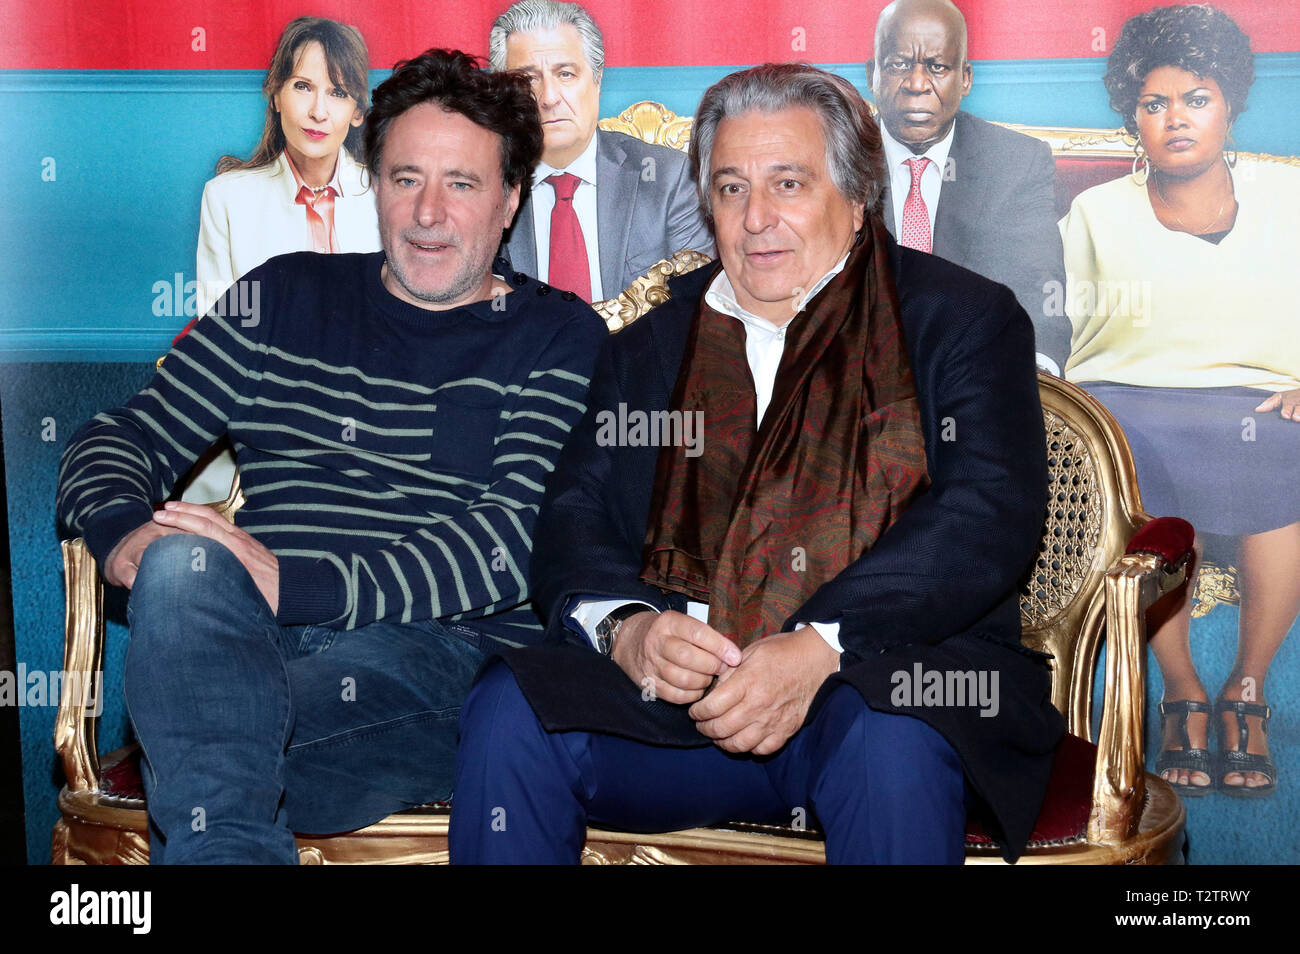 Philippe de Chauveron and Christian Clavier attending the 'Monsieur Claude  2' at Cinema International on April 2, 2019 in Berlin, Germany Stock Photo  - Alamy